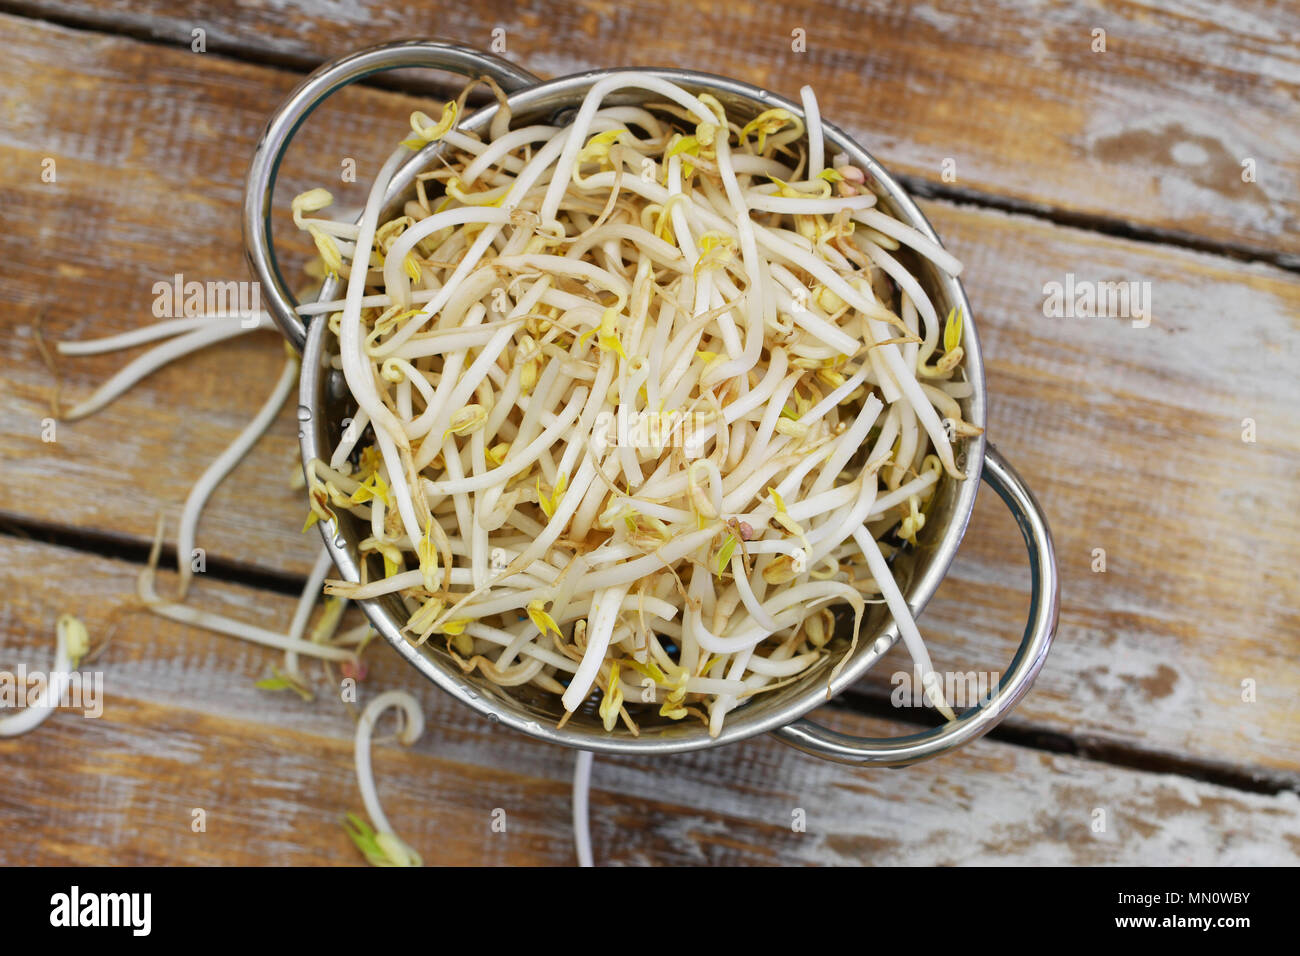 Raw beansprouts in colander on rustic wooden surface Stock Photo